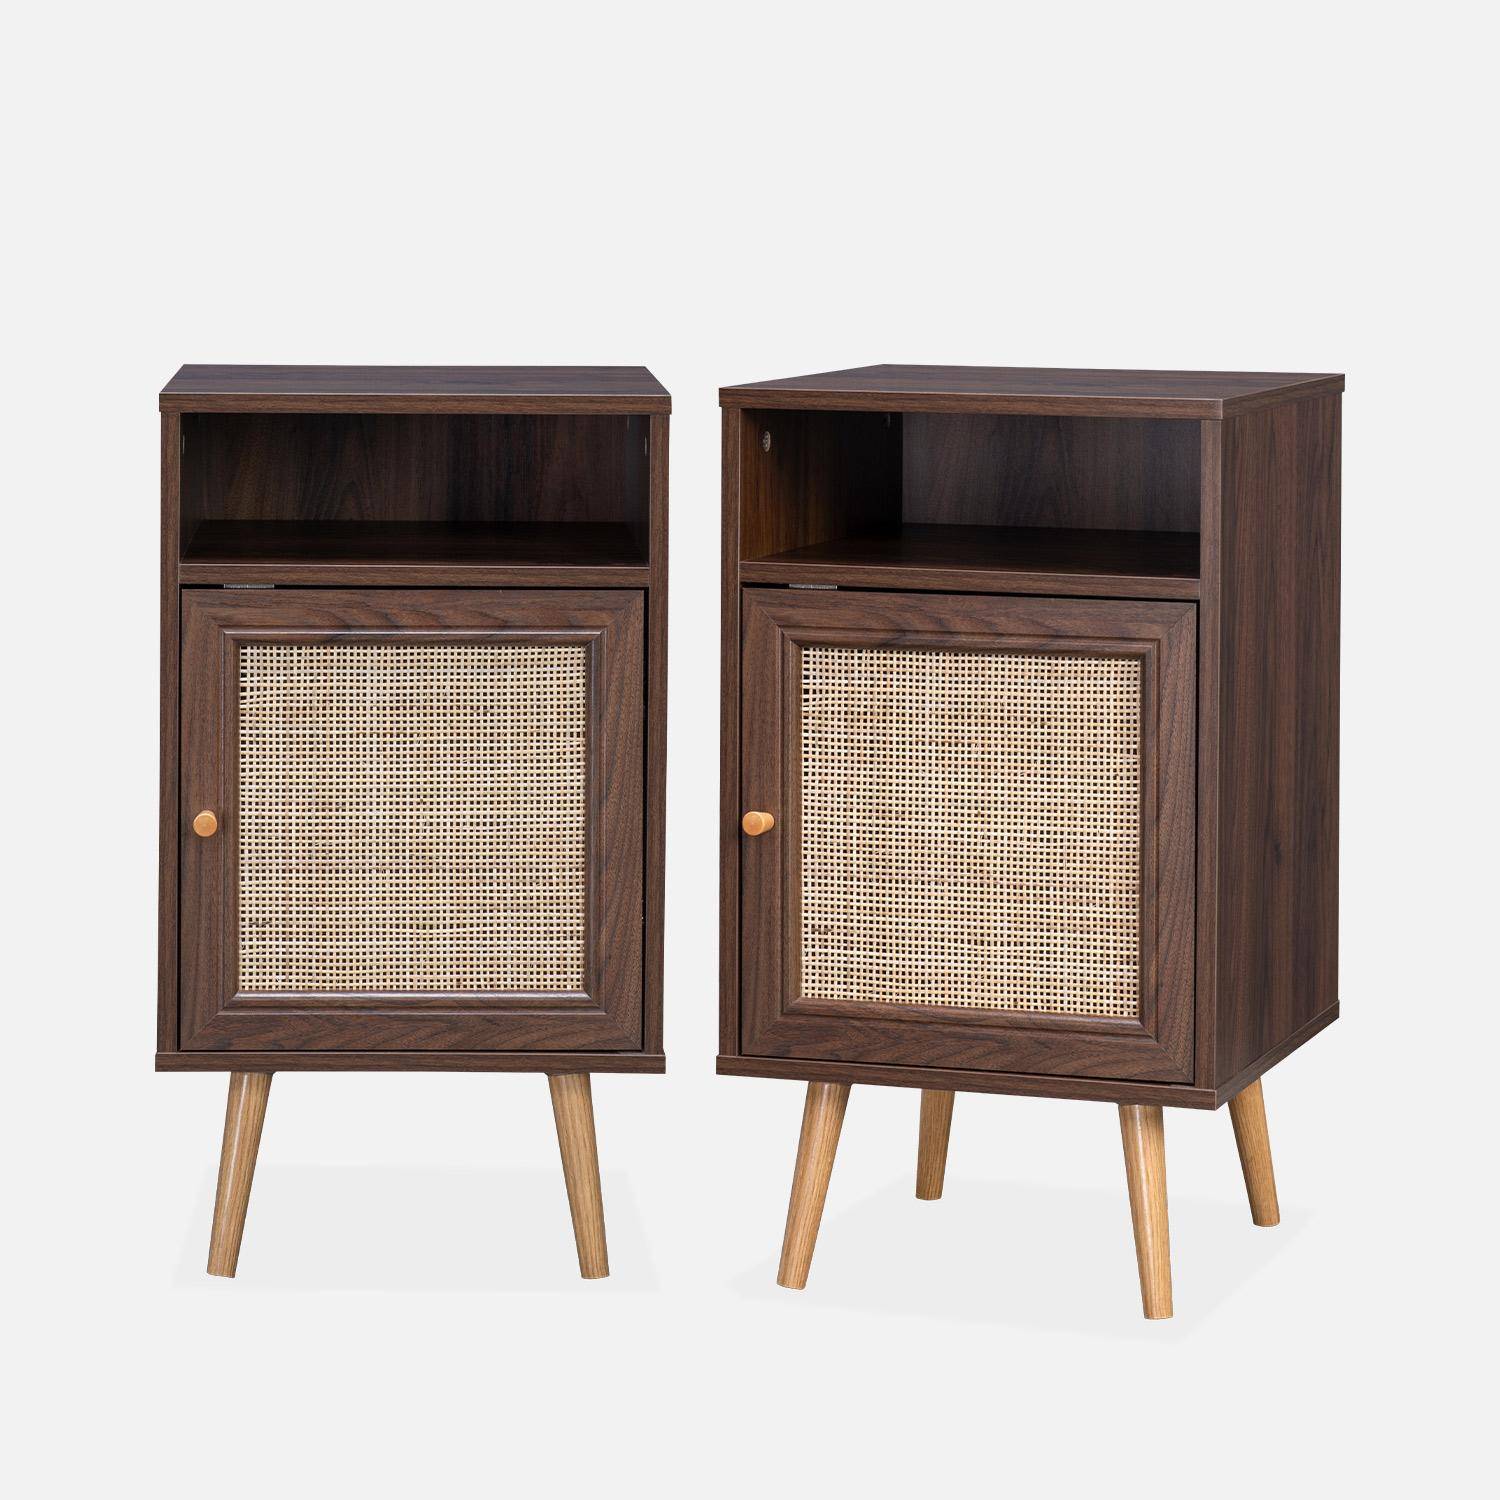 Pair of Scandi-style wood and cane rattan bedside tables with cupboard, 40x39x70cm - Boheme - Dark Wood colour,sweeek,Photo3